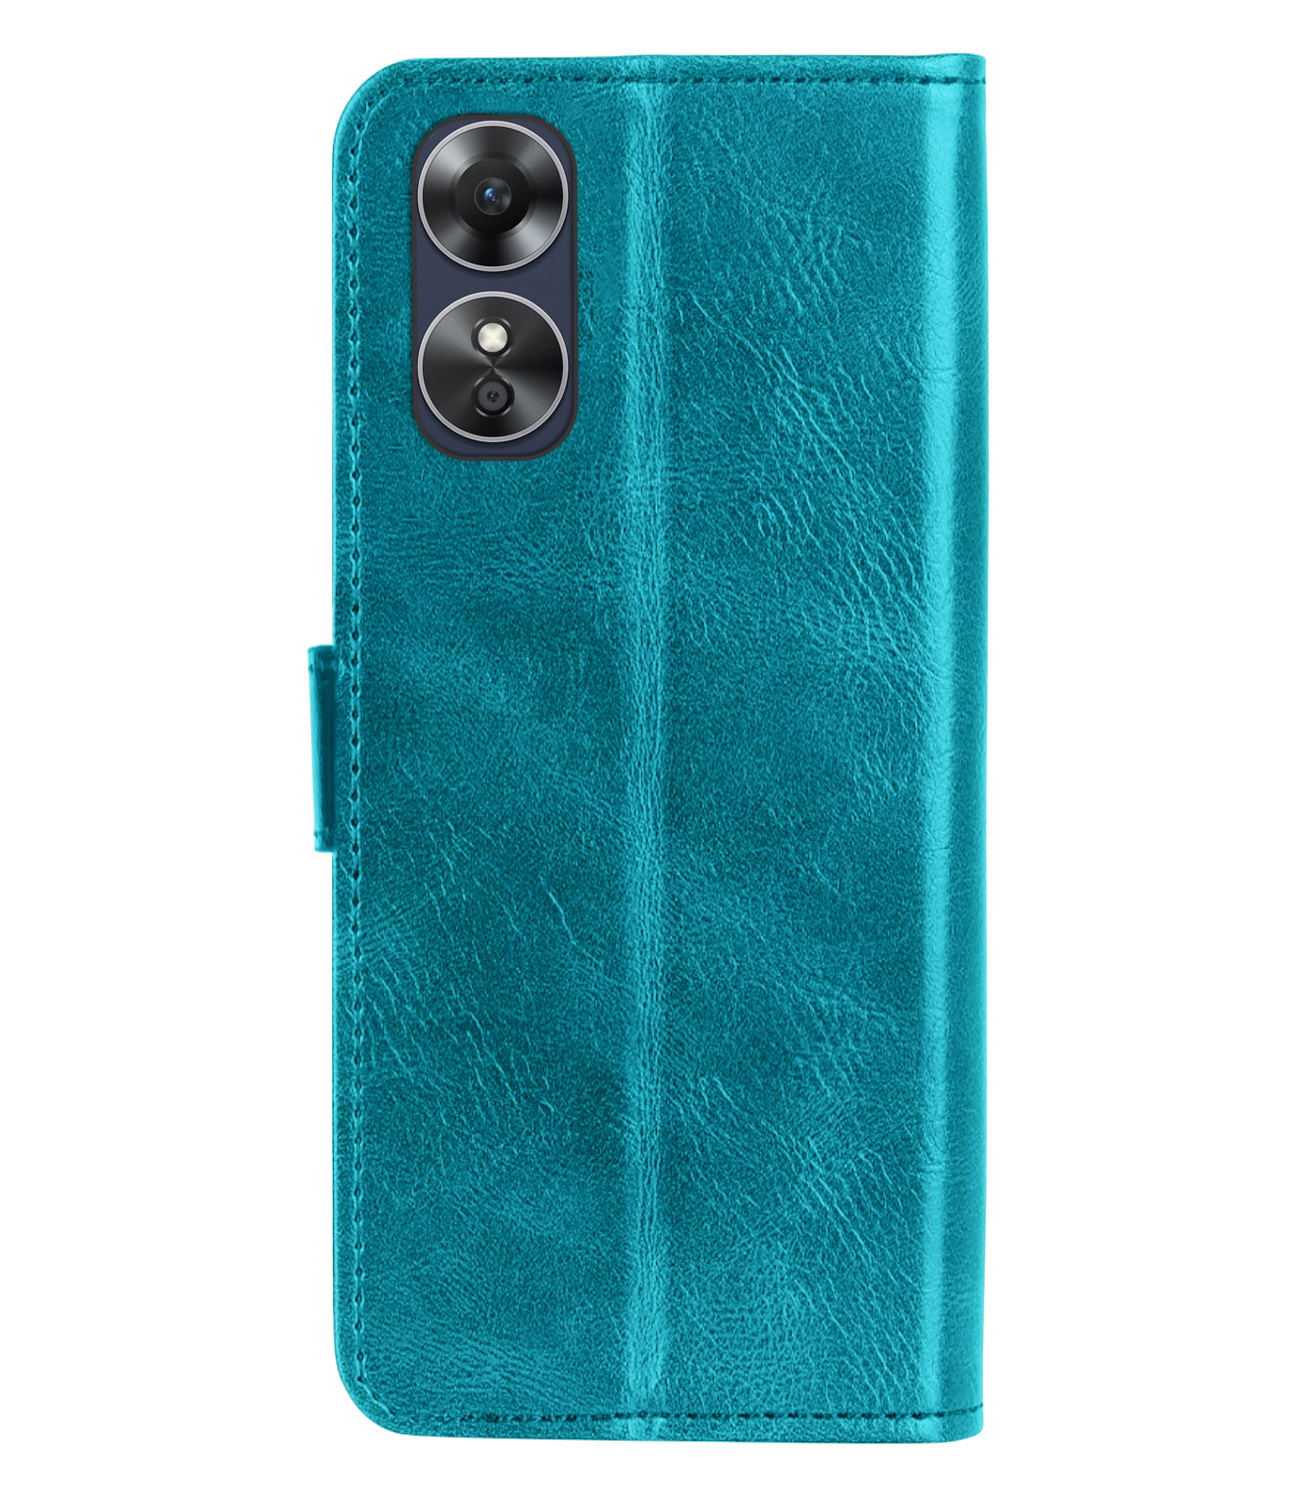 OPPO A17 Hoesje Bookcase Hoes Flip Case Book Cover 2x Met Screenprotector - OPPO A17 Hoes Book Case Hoesje - Turquoise